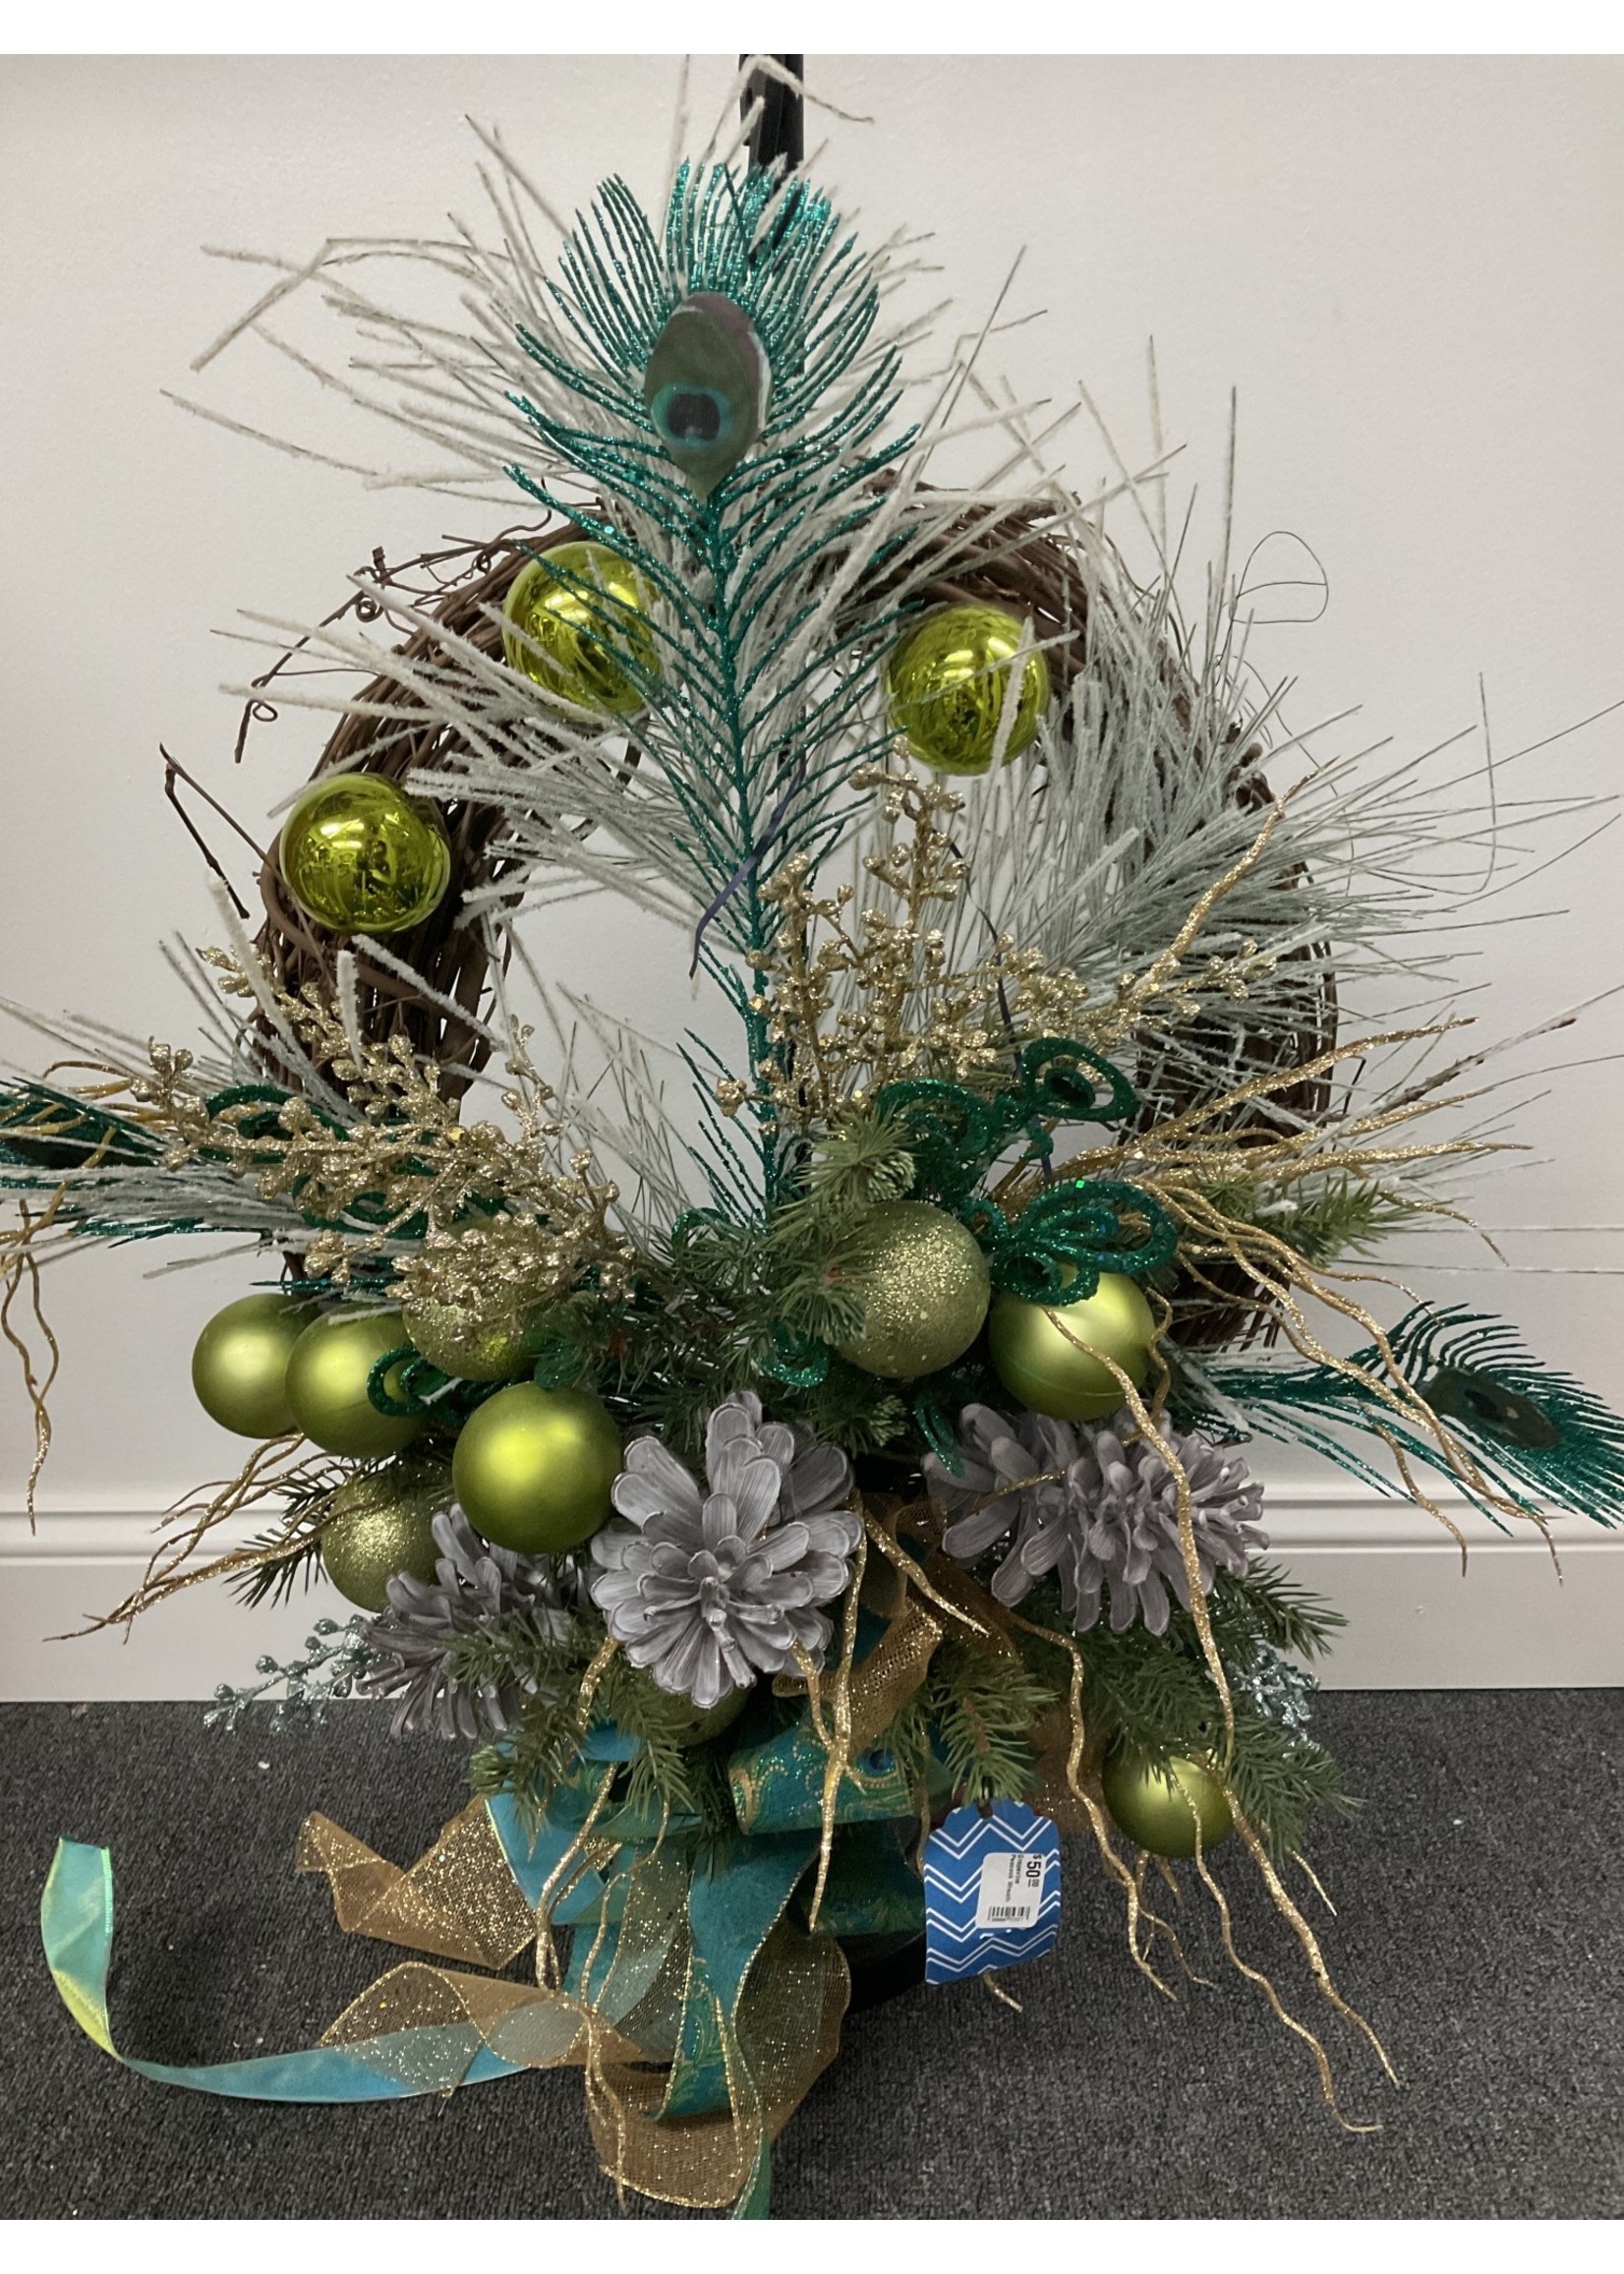 My New Favorite Thing Wreath Grapevine with Pinecones, Green Ornaments and Peacock Feathers